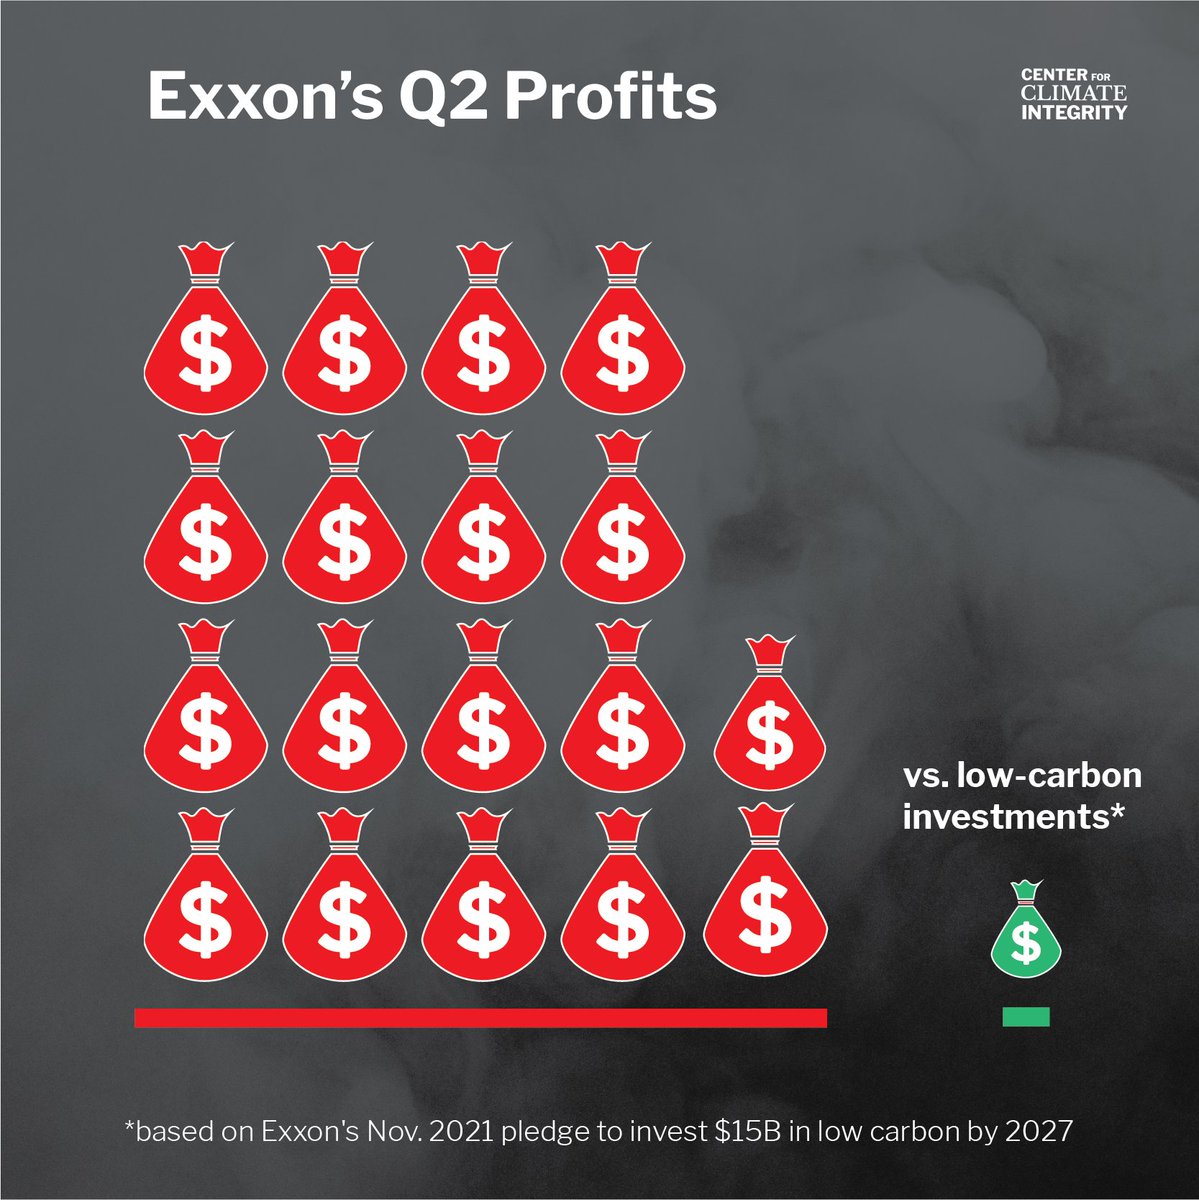 Instead of making real investments in renewable energy, Exxon is using its record profits to enrich shareholders and double down on fossil fuels. 💰💰💰💰💰

Don’t be fooled: Big Oil cannot be trusted to be part of the solution.